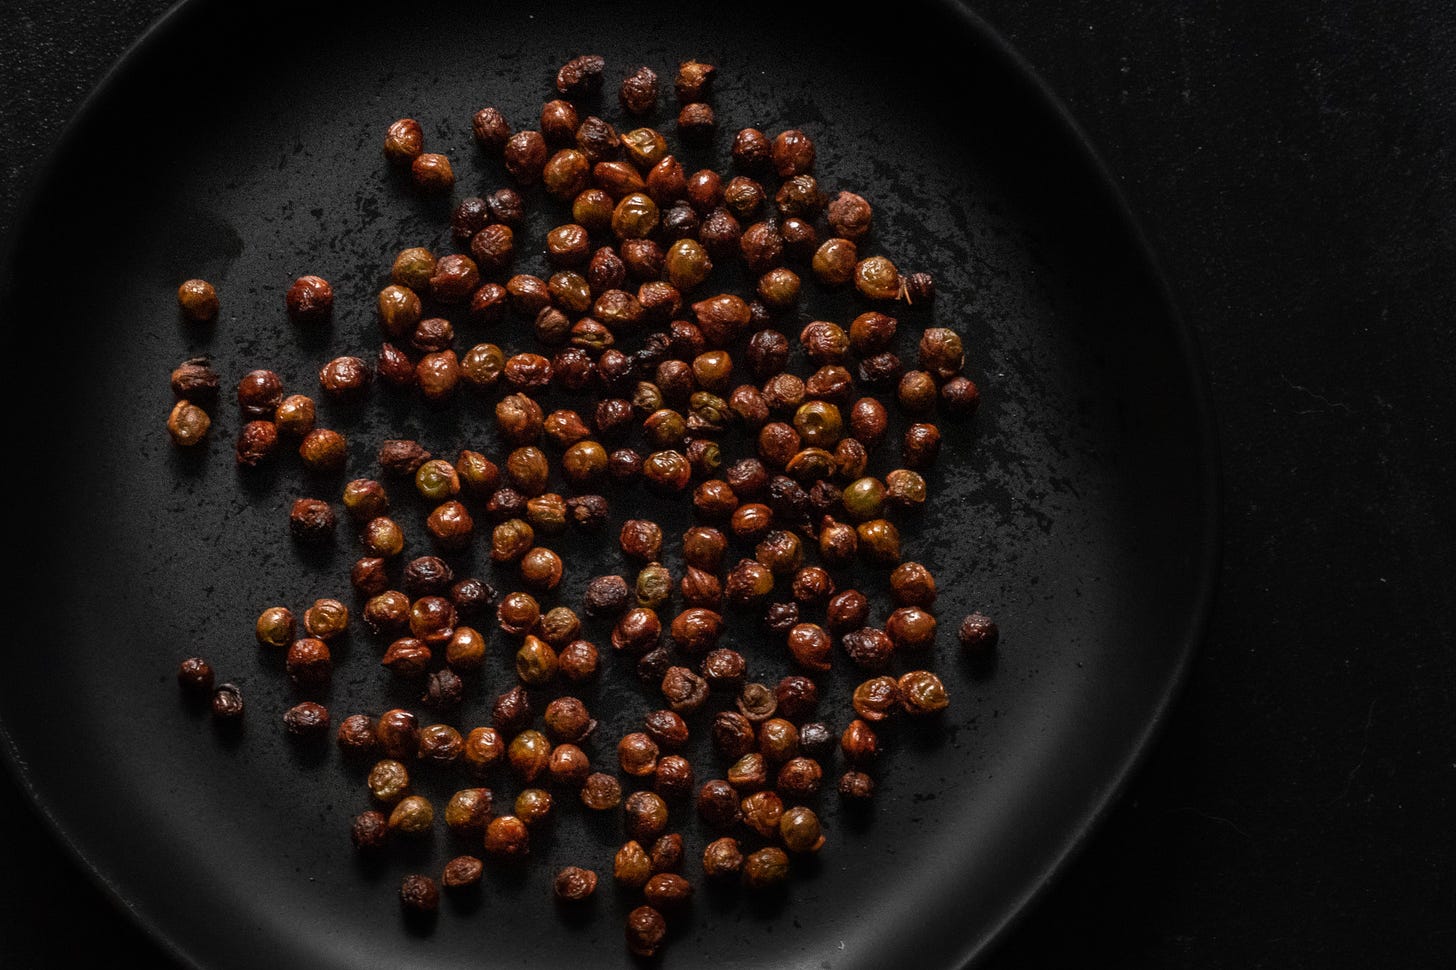 Dark photo of roasted maple seeds on a black plate with a black background, shot by JB Douglas for The Wild Grocery